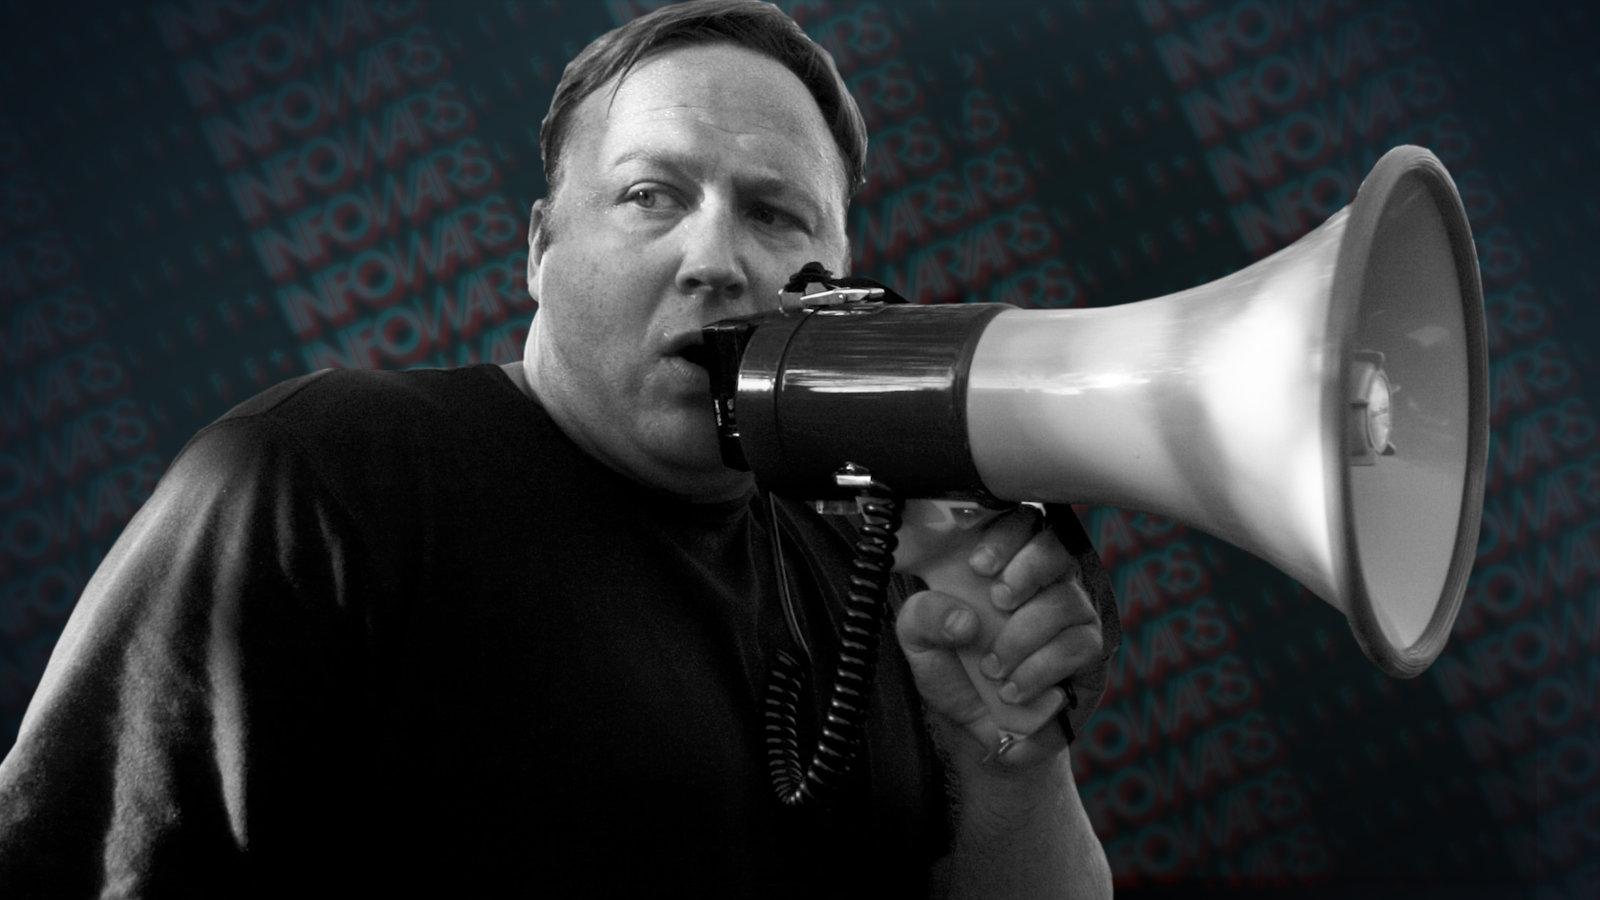 Fans of Infowars don’t just buy in to the conspiracy theories peddled by Alex Jones, they actually buy. Mr. Jones has amassed a fortune by pitching health products and weapons components as antidotes